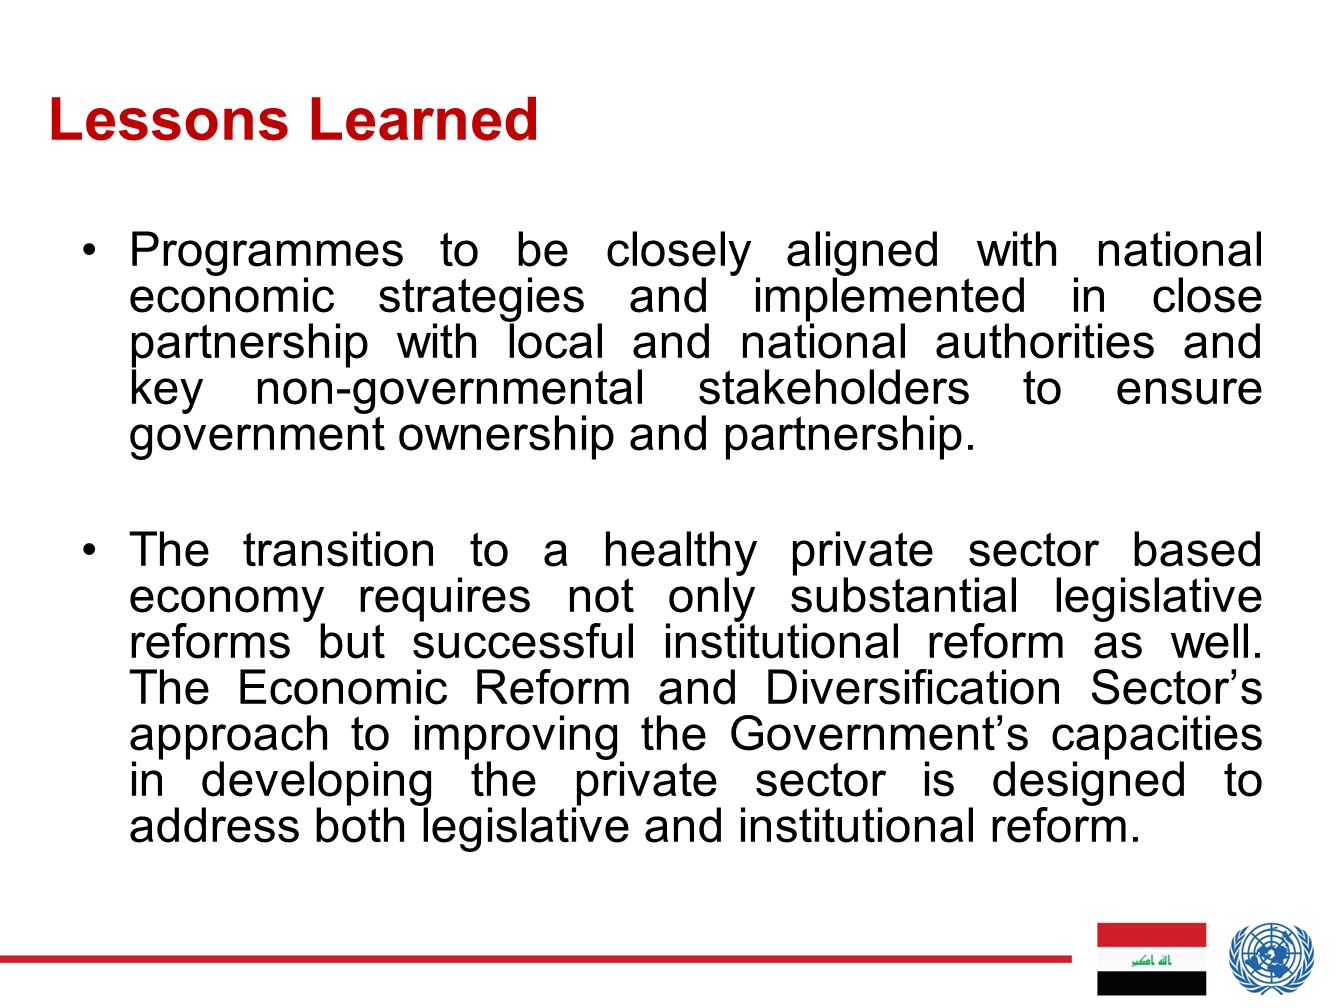 Lessons Learned Programmes to be closely aligned with national economic strategies and implemented in close partnership with local and national authorities and key non-governmental stakeholders to ensure government ownership and partnership.